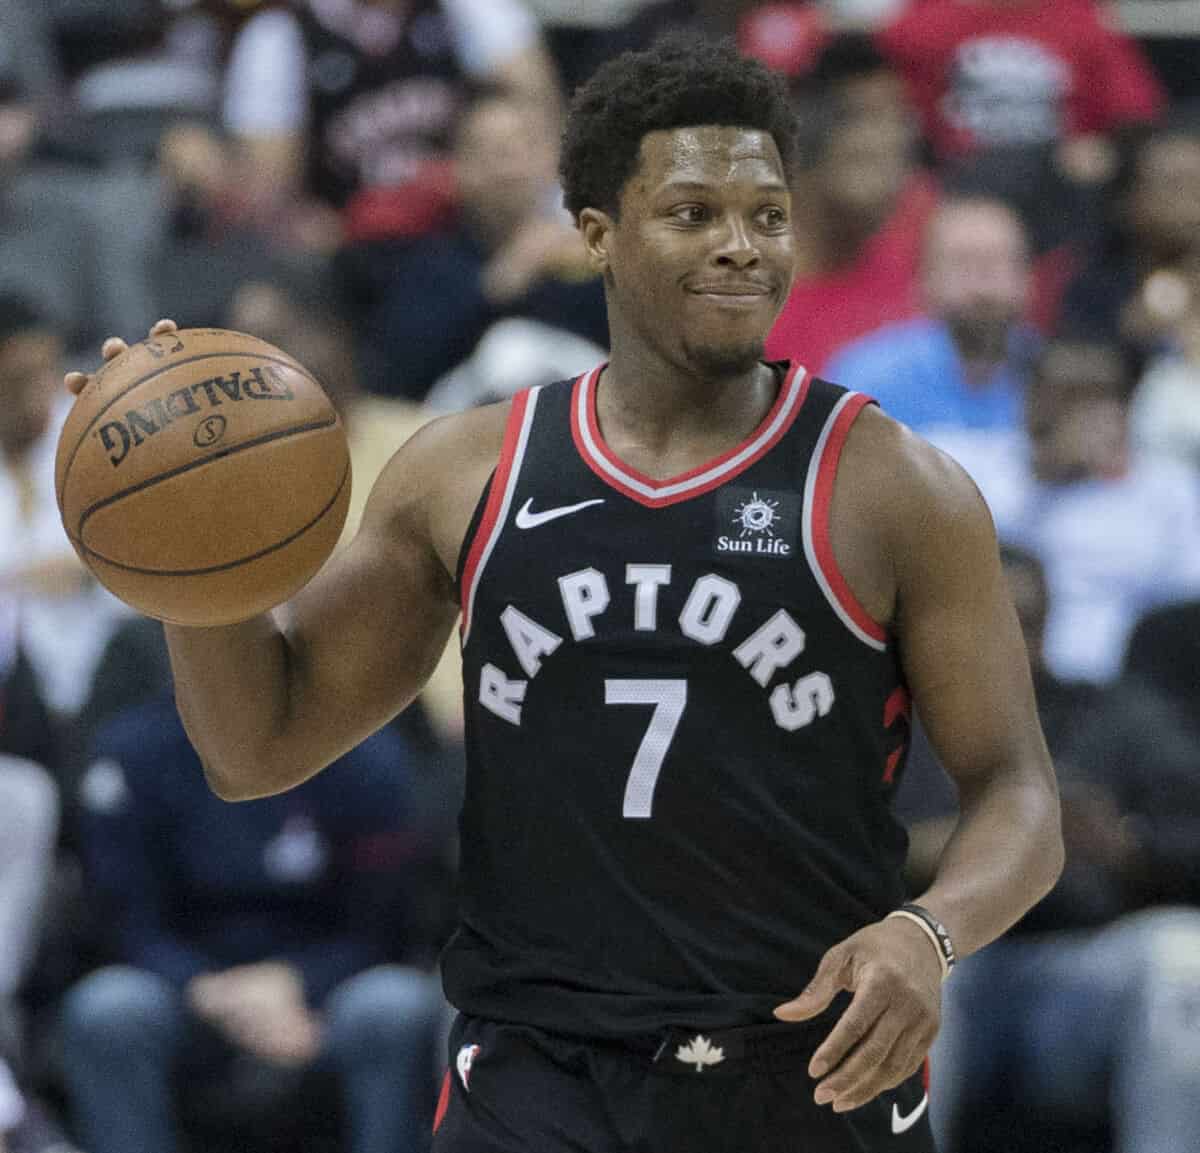 Kyle Lowry - Famous NBA Player